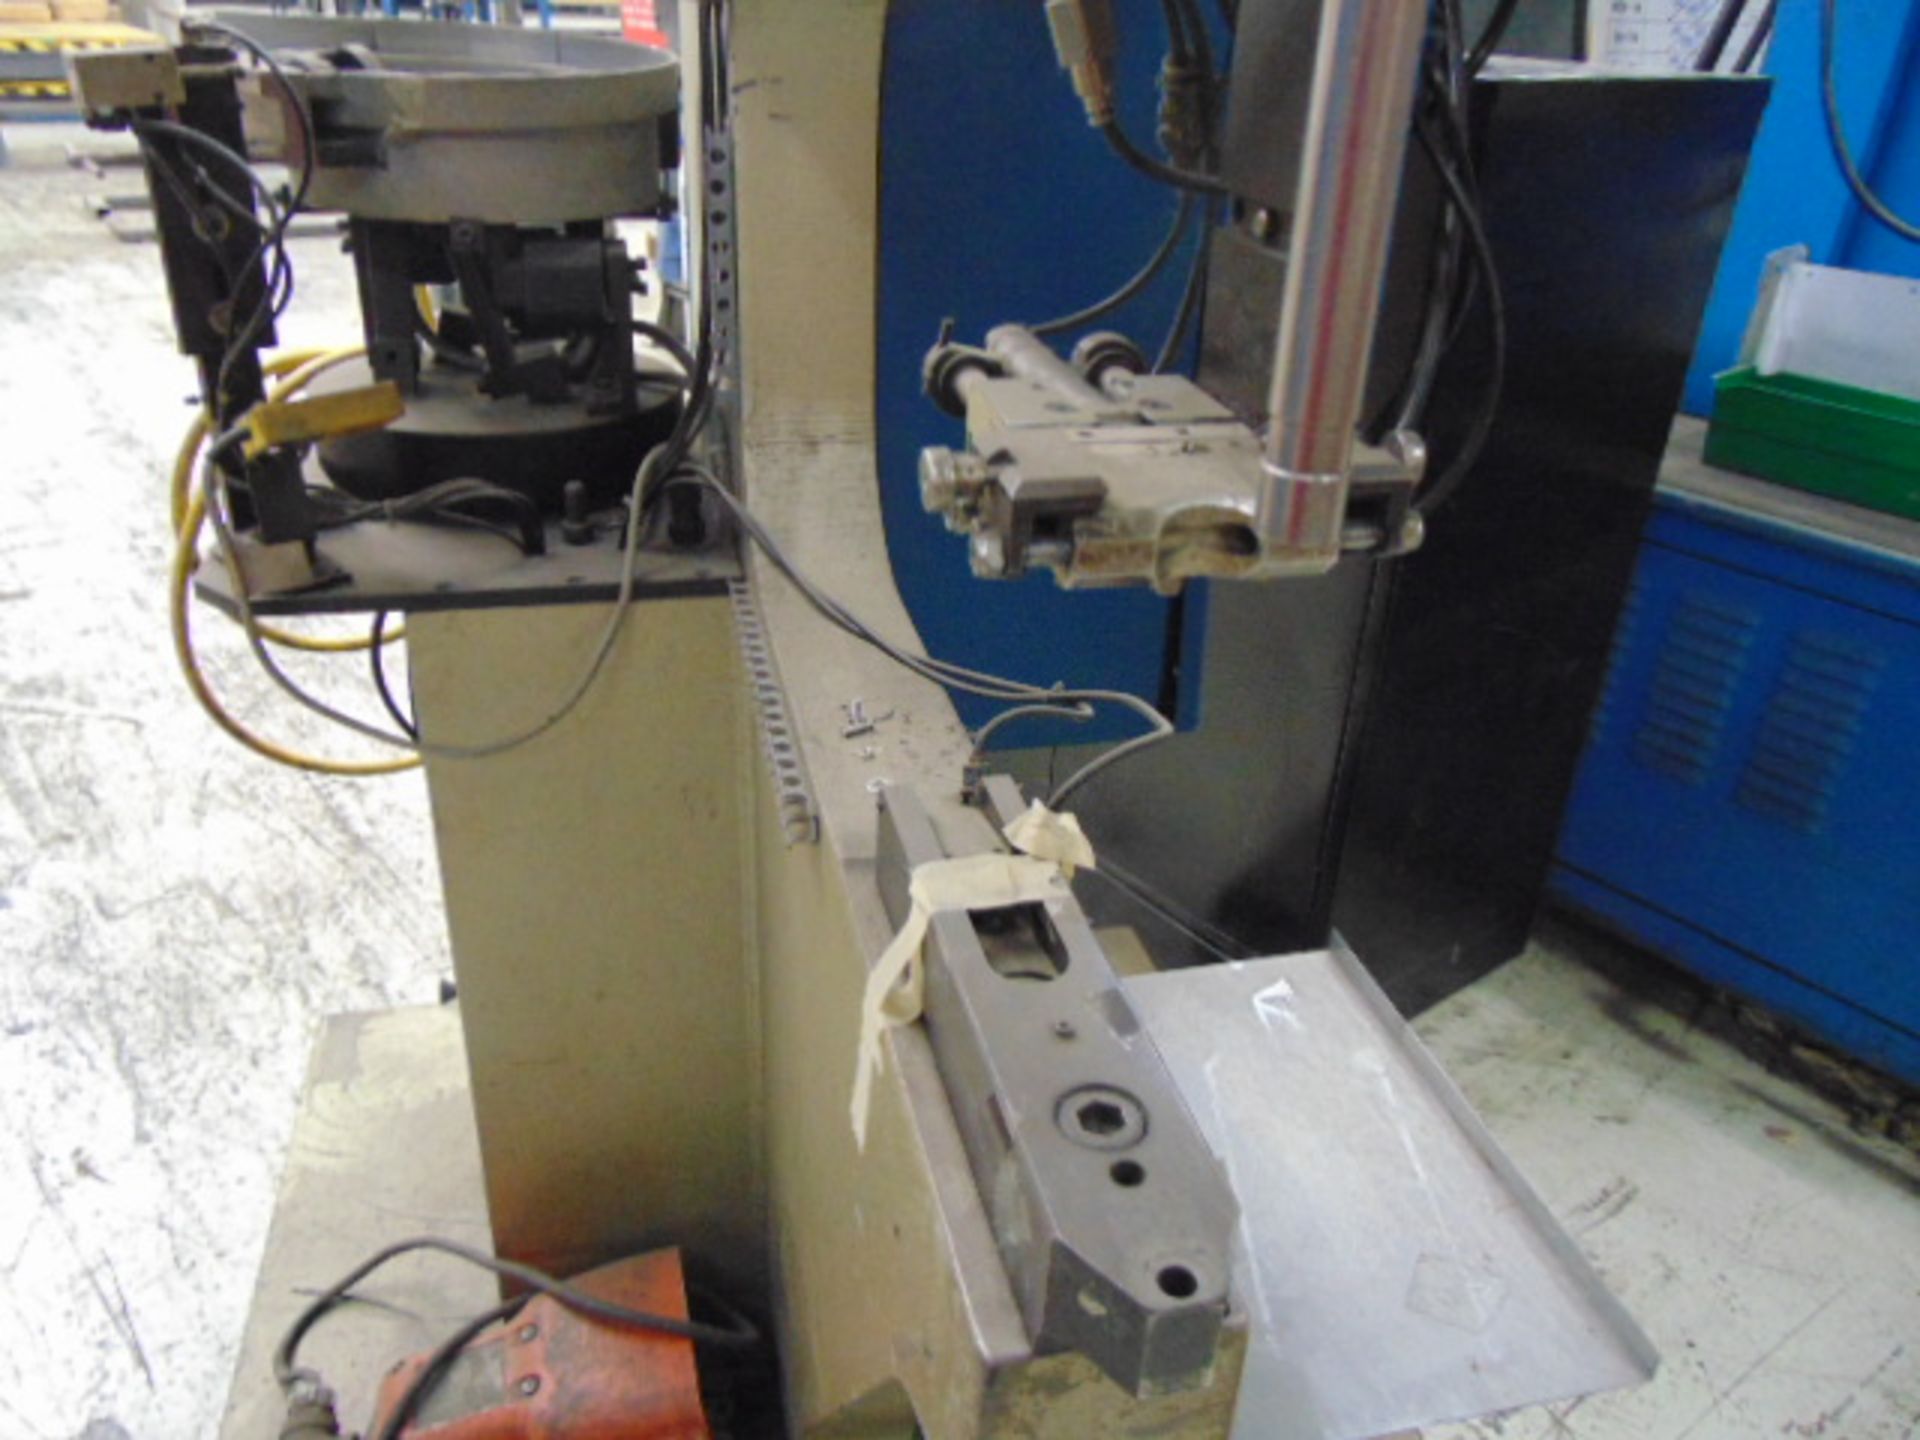 HARDWARE PRESS, PEMSERTER SERIES 2000A, new 1997, vibratory bowl feed, S/N 2013A-115 - Image 3 of 5